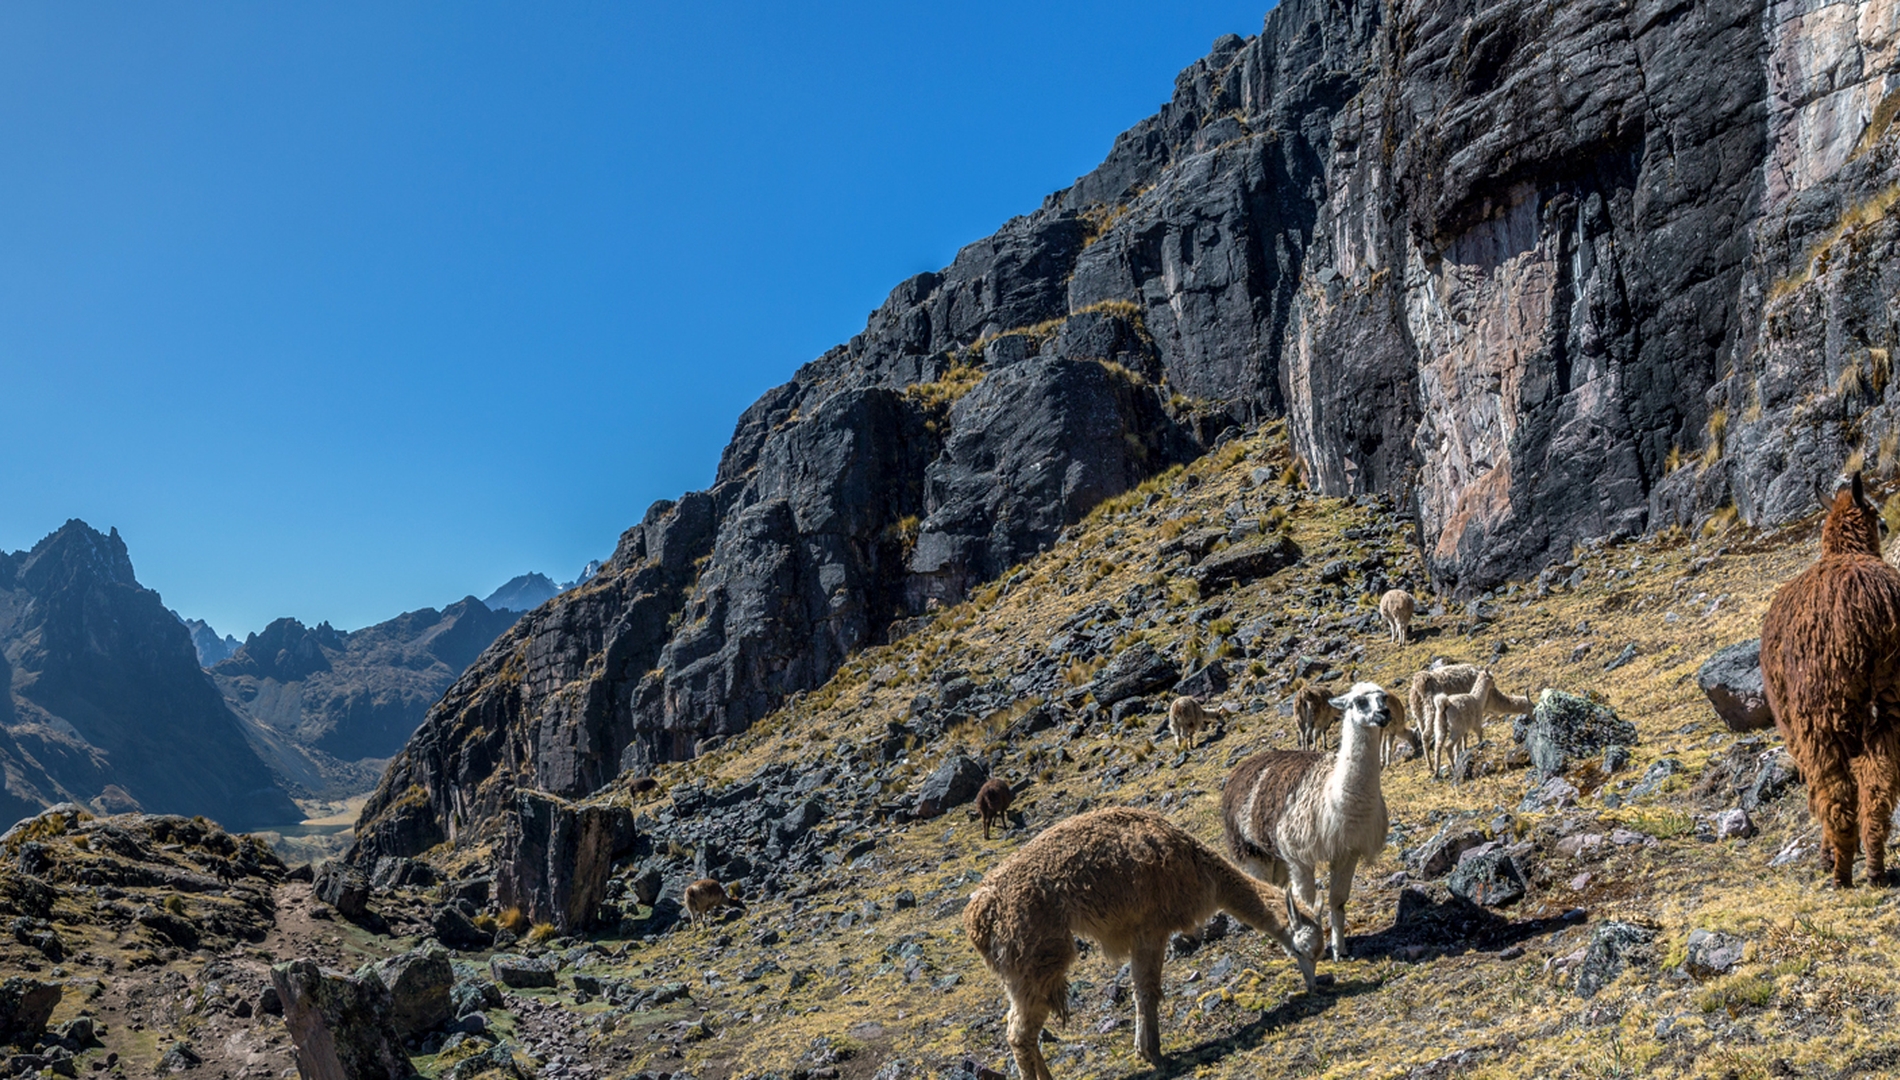 View llamas on the path to lares comunnity